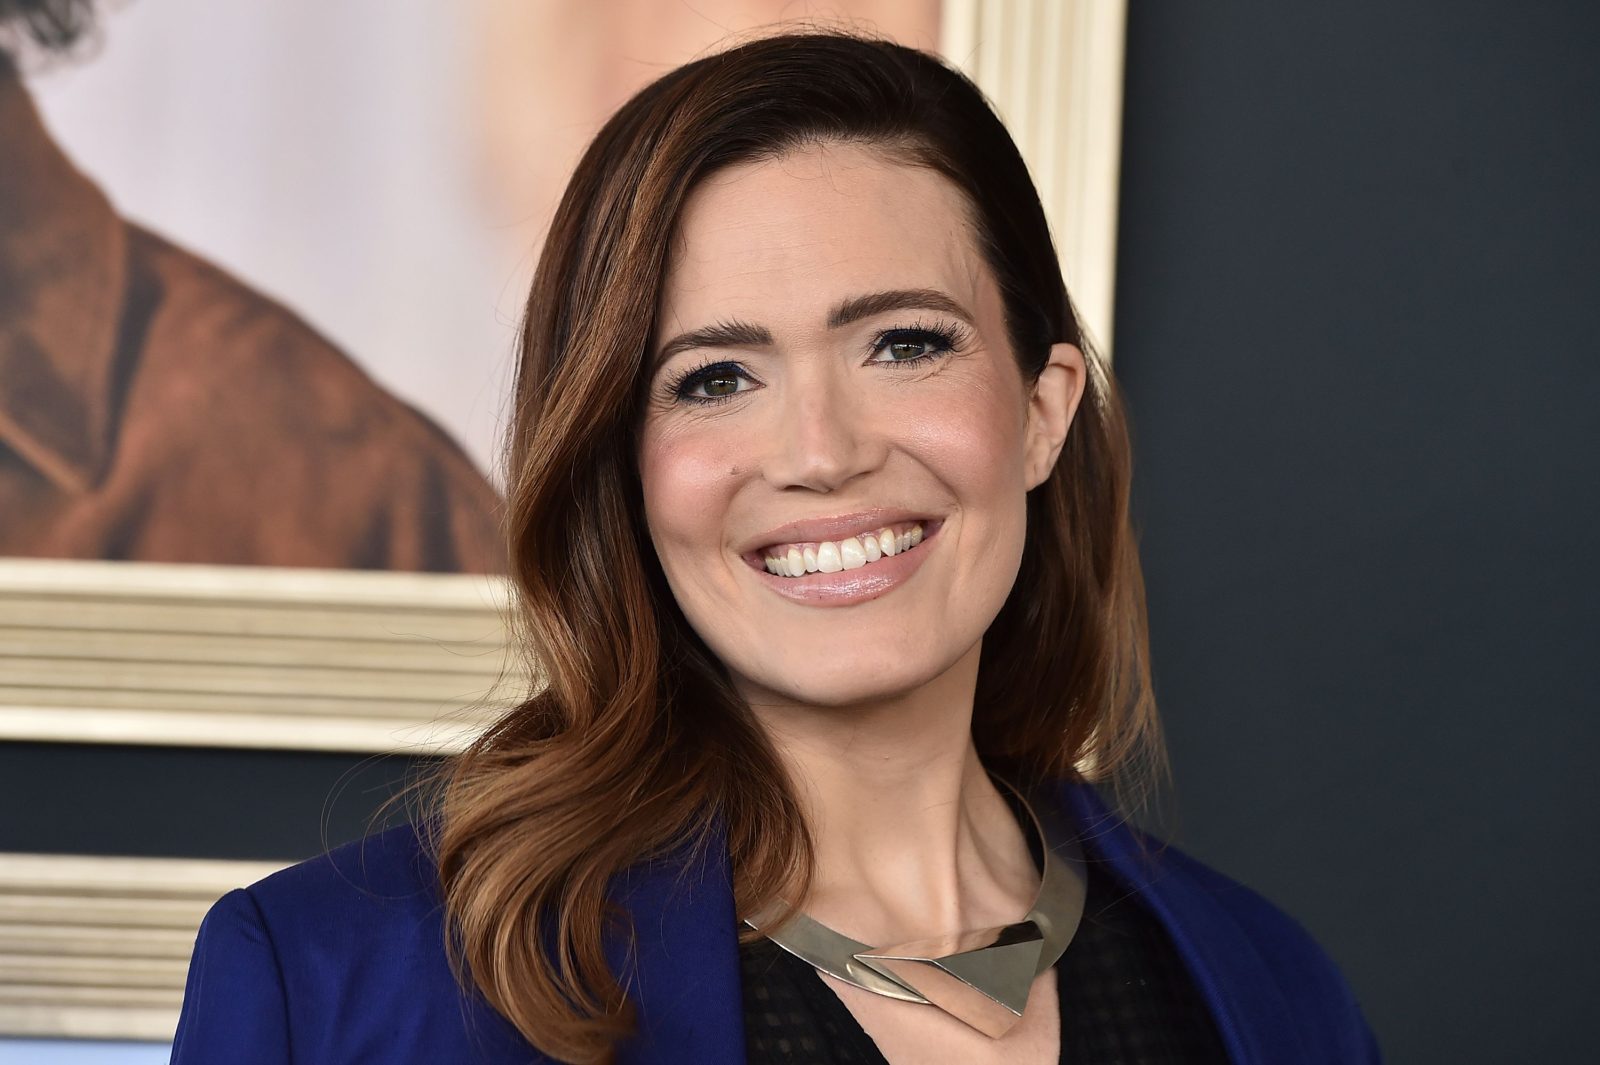 Mandy Moore Biography Height Weight Age Movies Husband Family Salary Net Worth Facts More